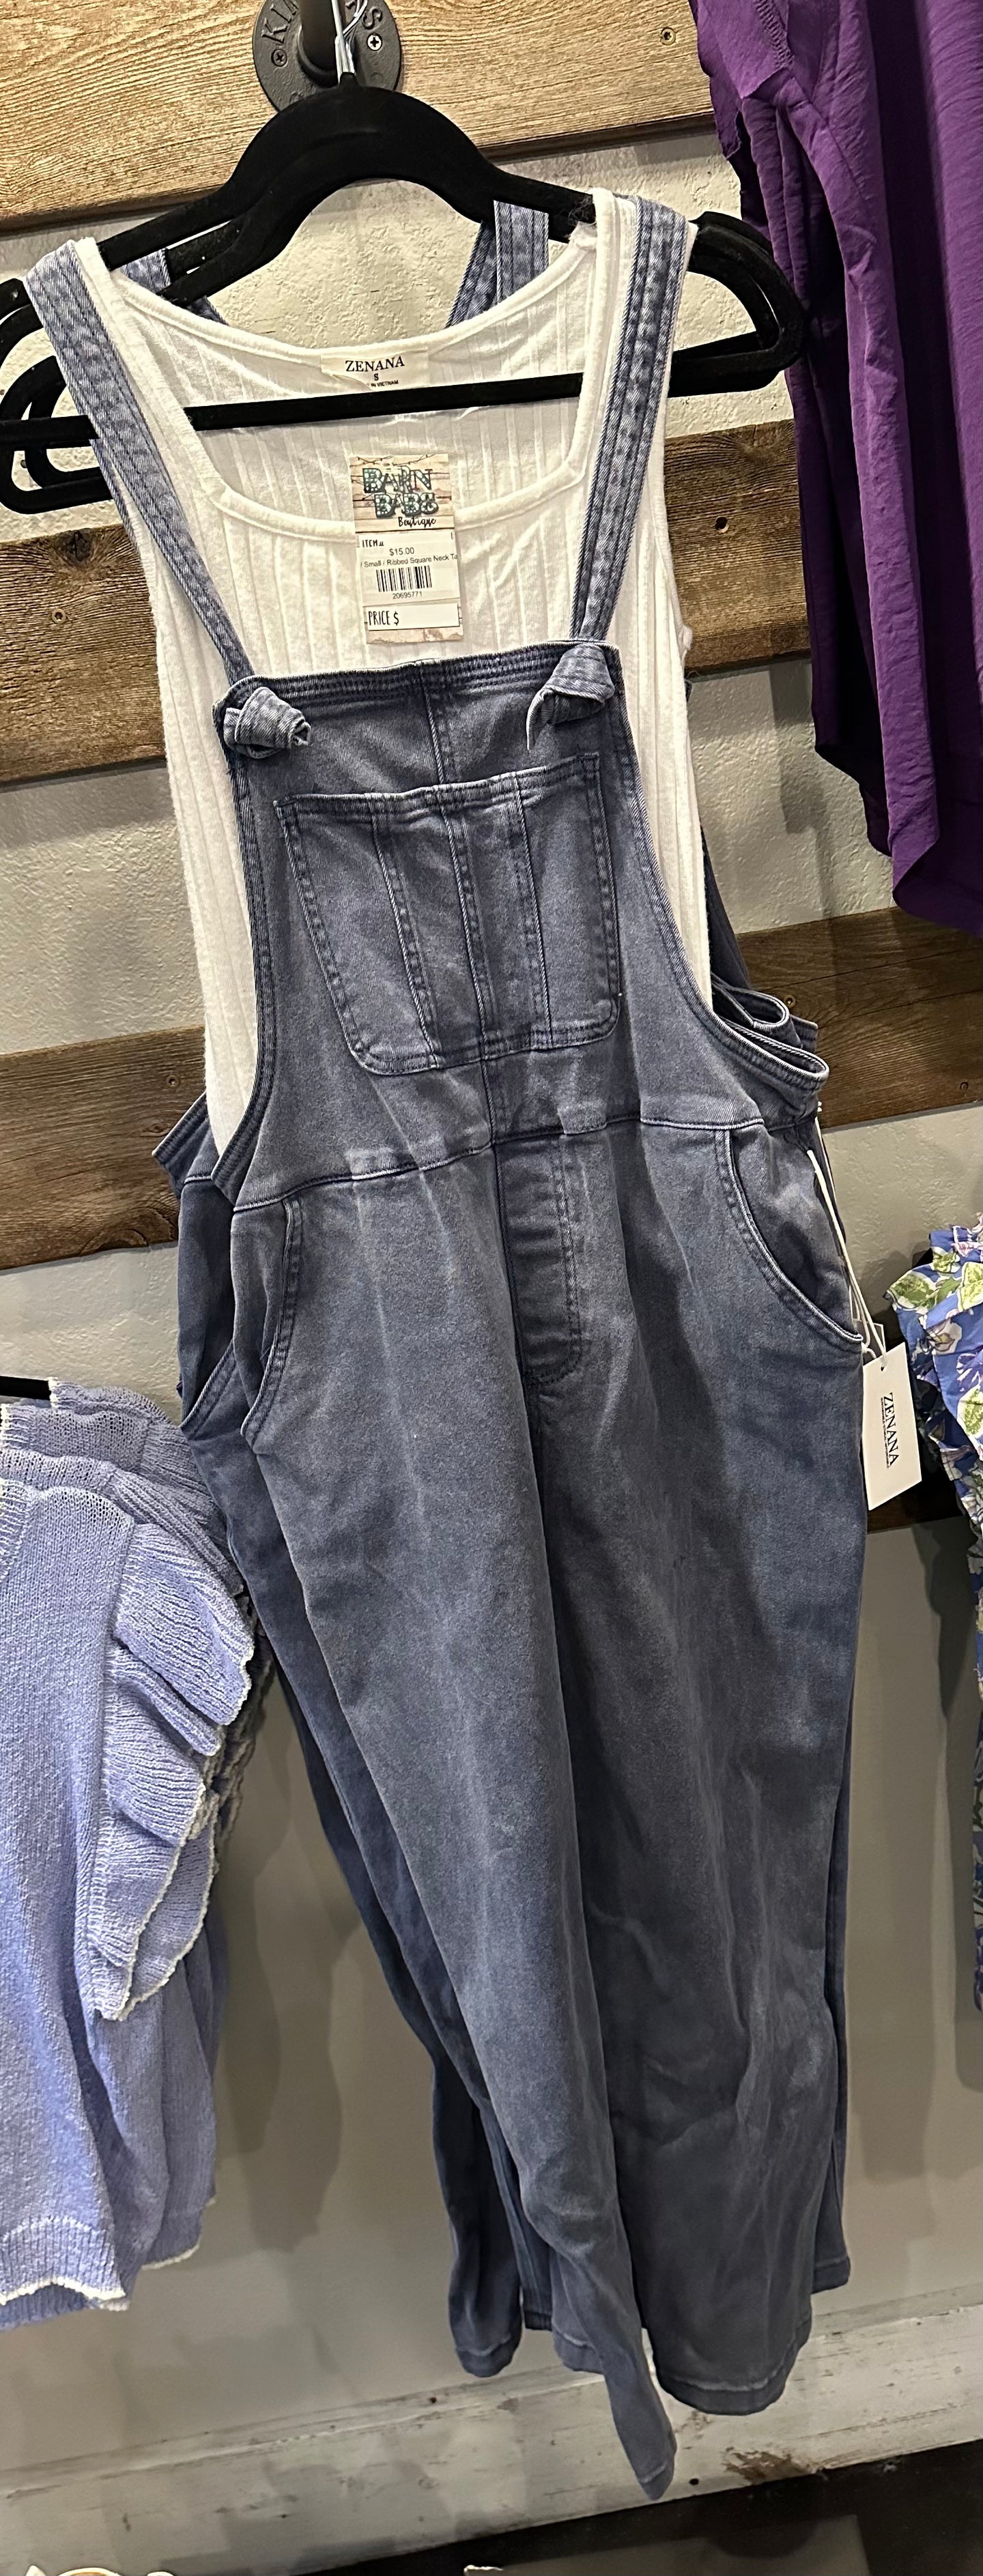 Washed Knot Strap Overalls